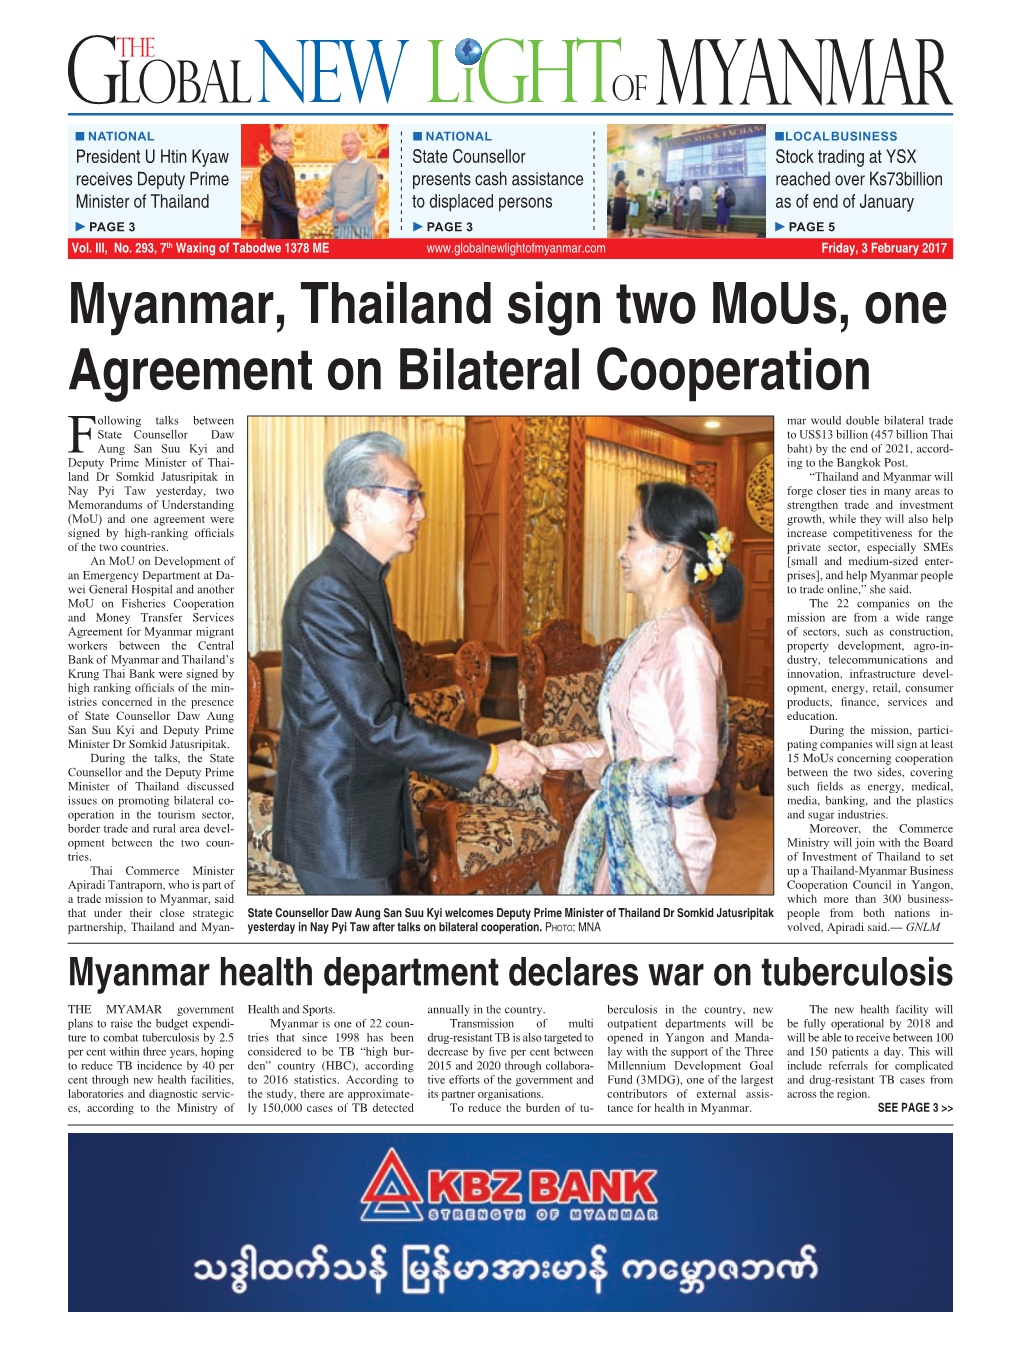 Myanmar, Thailand Sign Two Mous, One Agreement on Bilateral